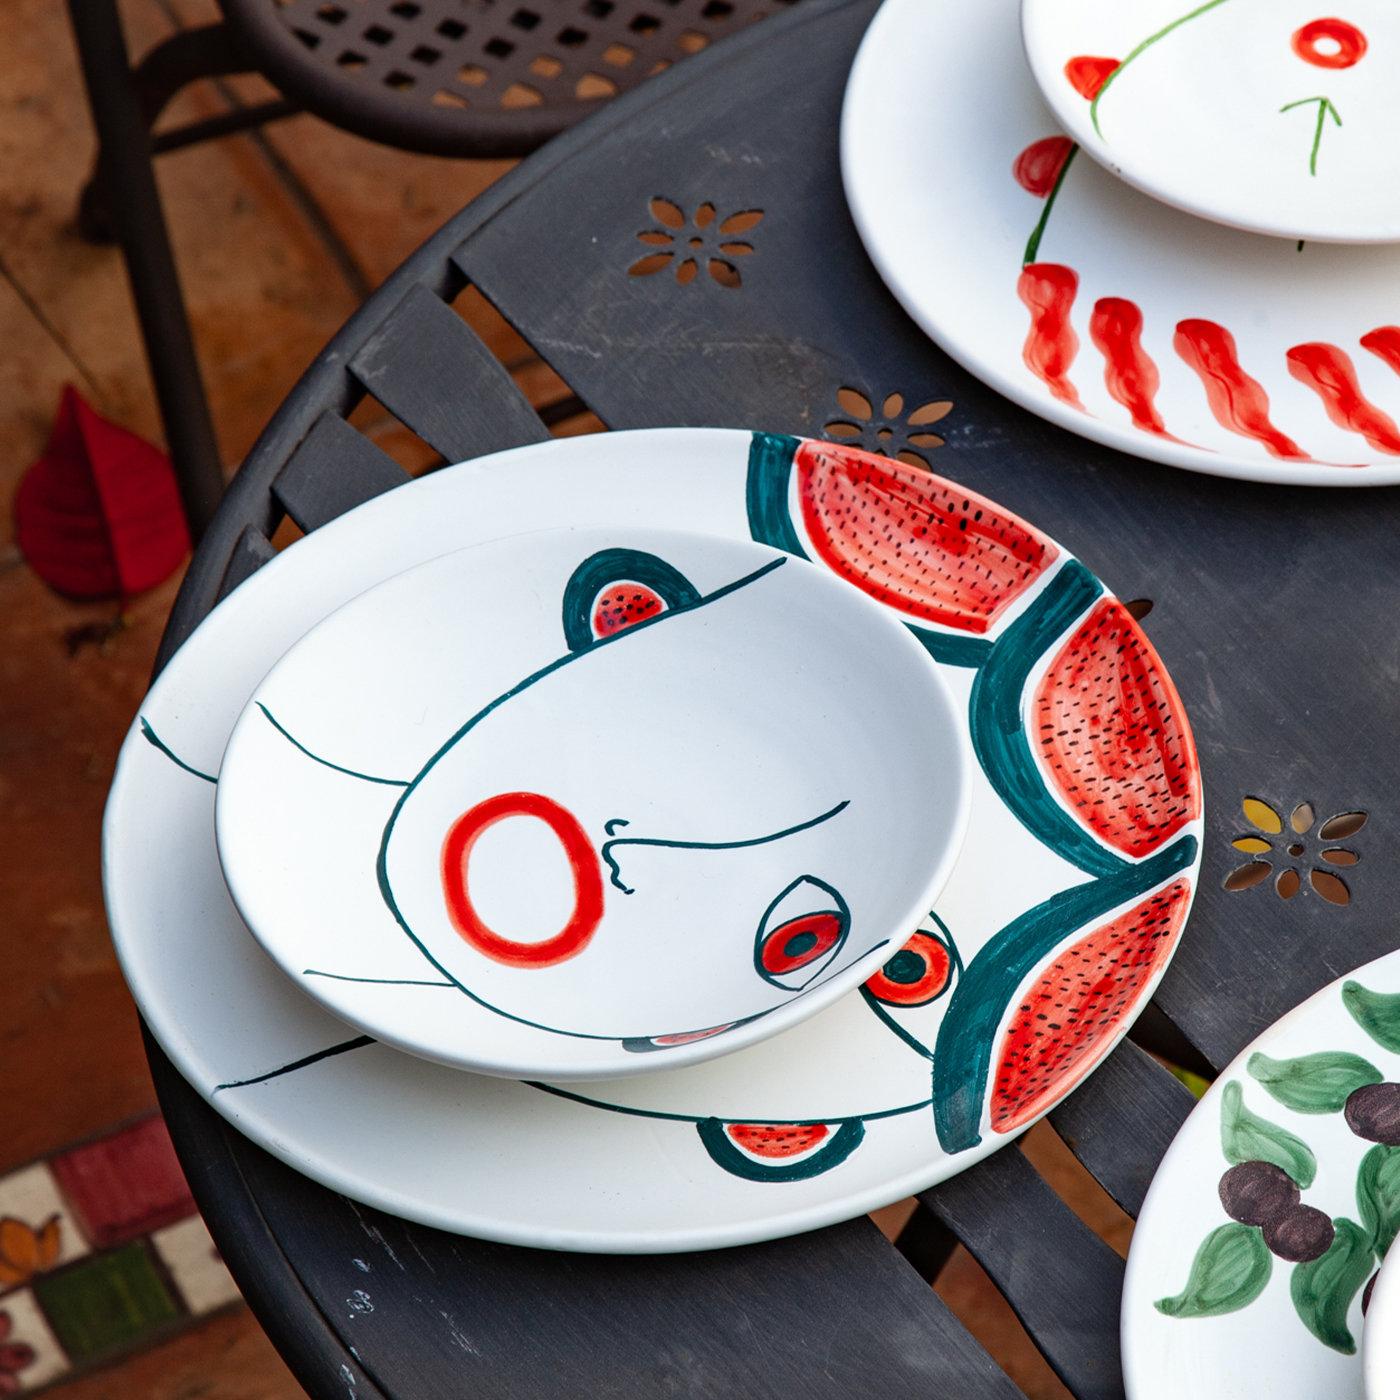 Handcrafted of matte-white-glazed ceramic and finely hand-painted by Patrizia Italiano as an homage to Sicilian local markets, this stylish and fresh set includes two dinner plates (⌀ 30 cm) and two soup plates (⌀ 18 cm) embellished with colorful